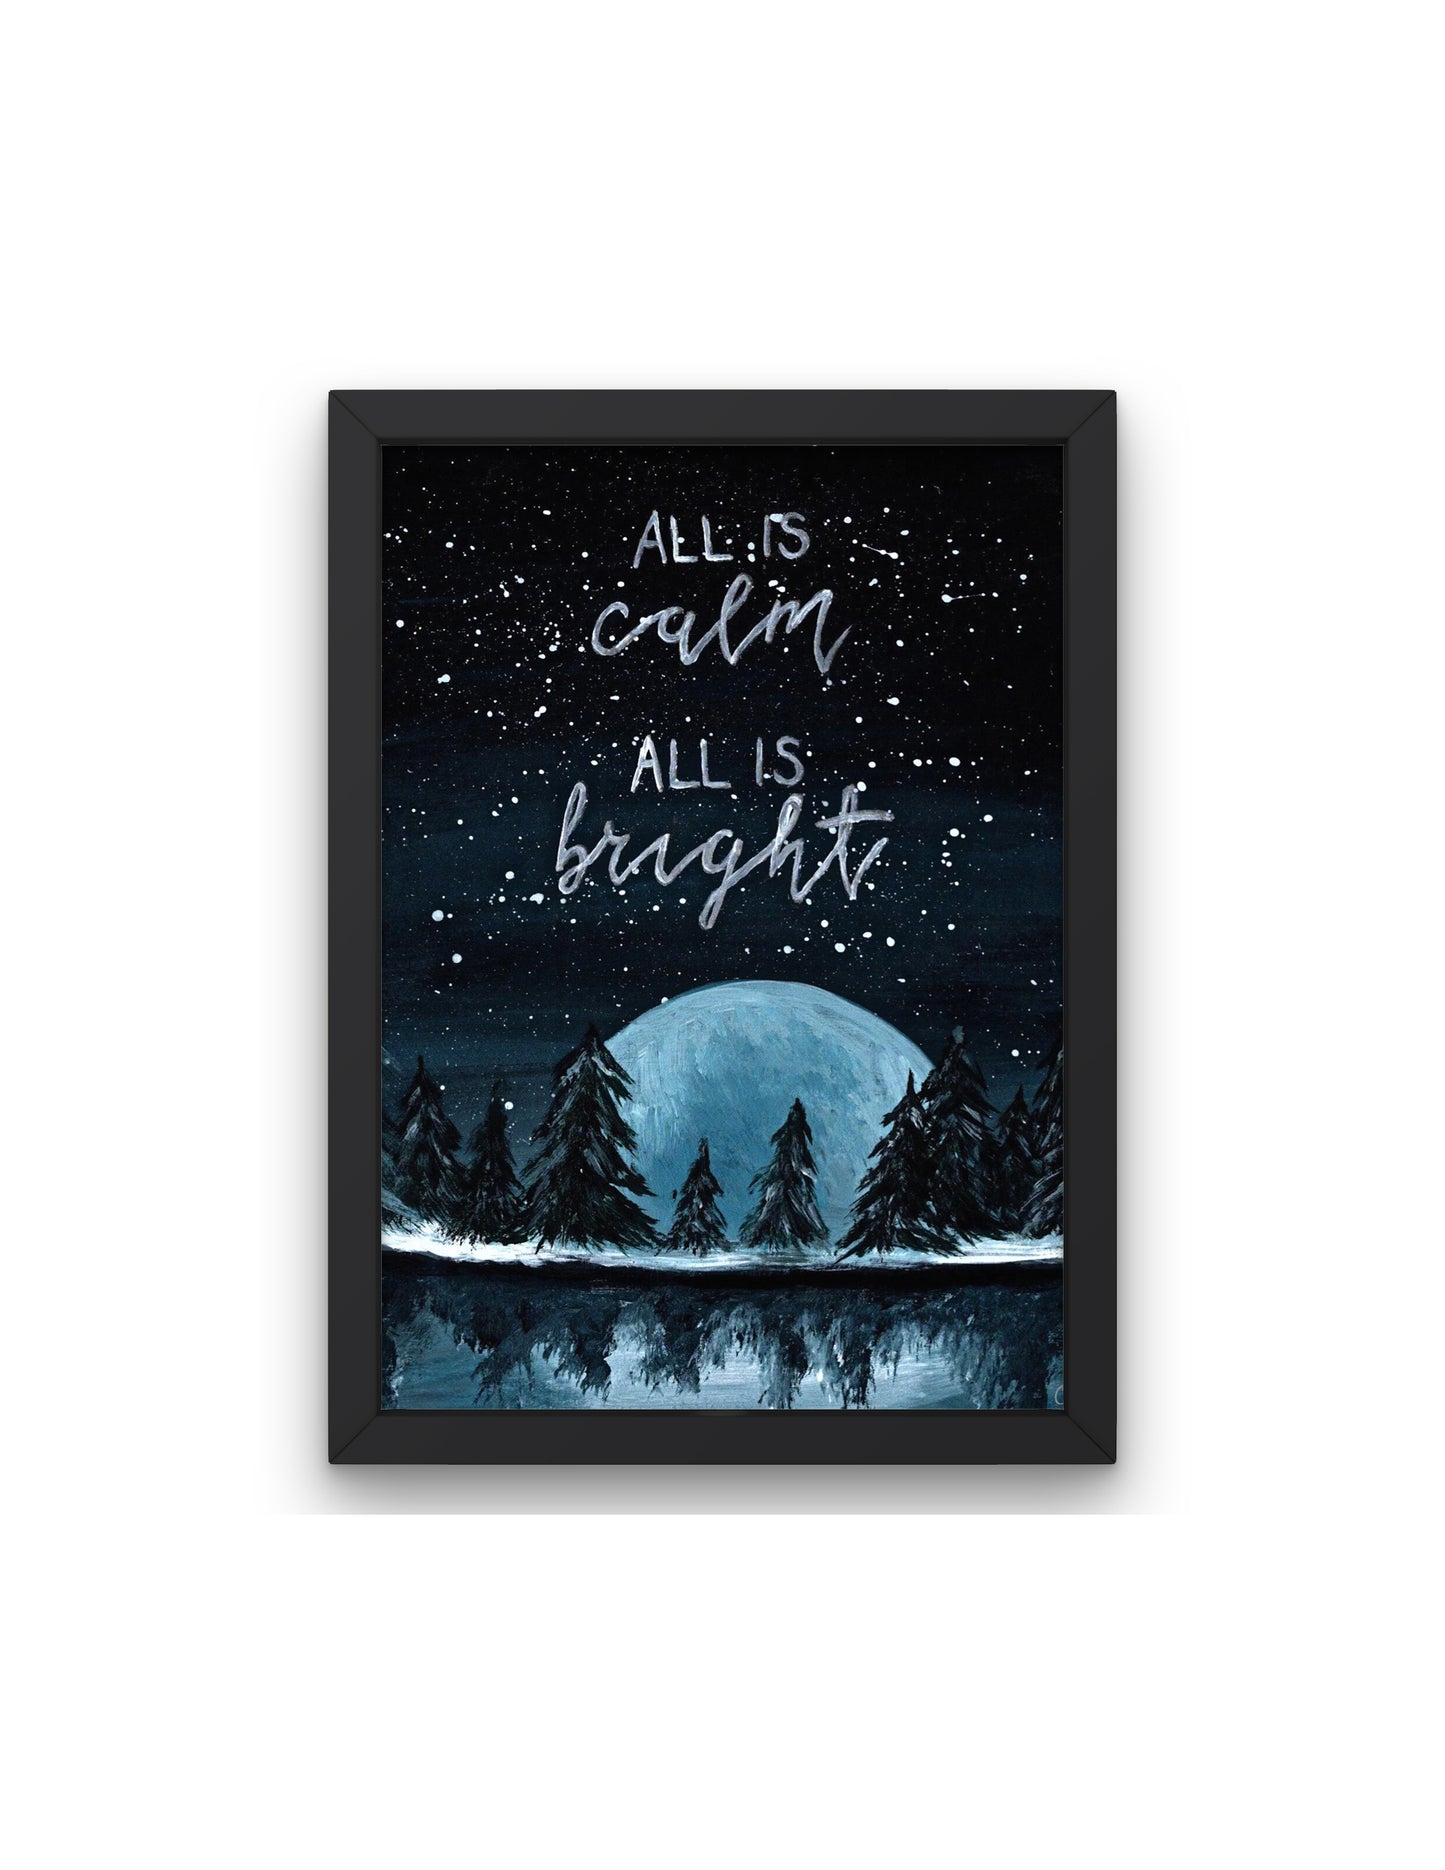 All is calm, All is bright, Silent night Christmas decor, Snowy woodland Christmas print, Christmas tree forest decor, Outdoorsy holiday art